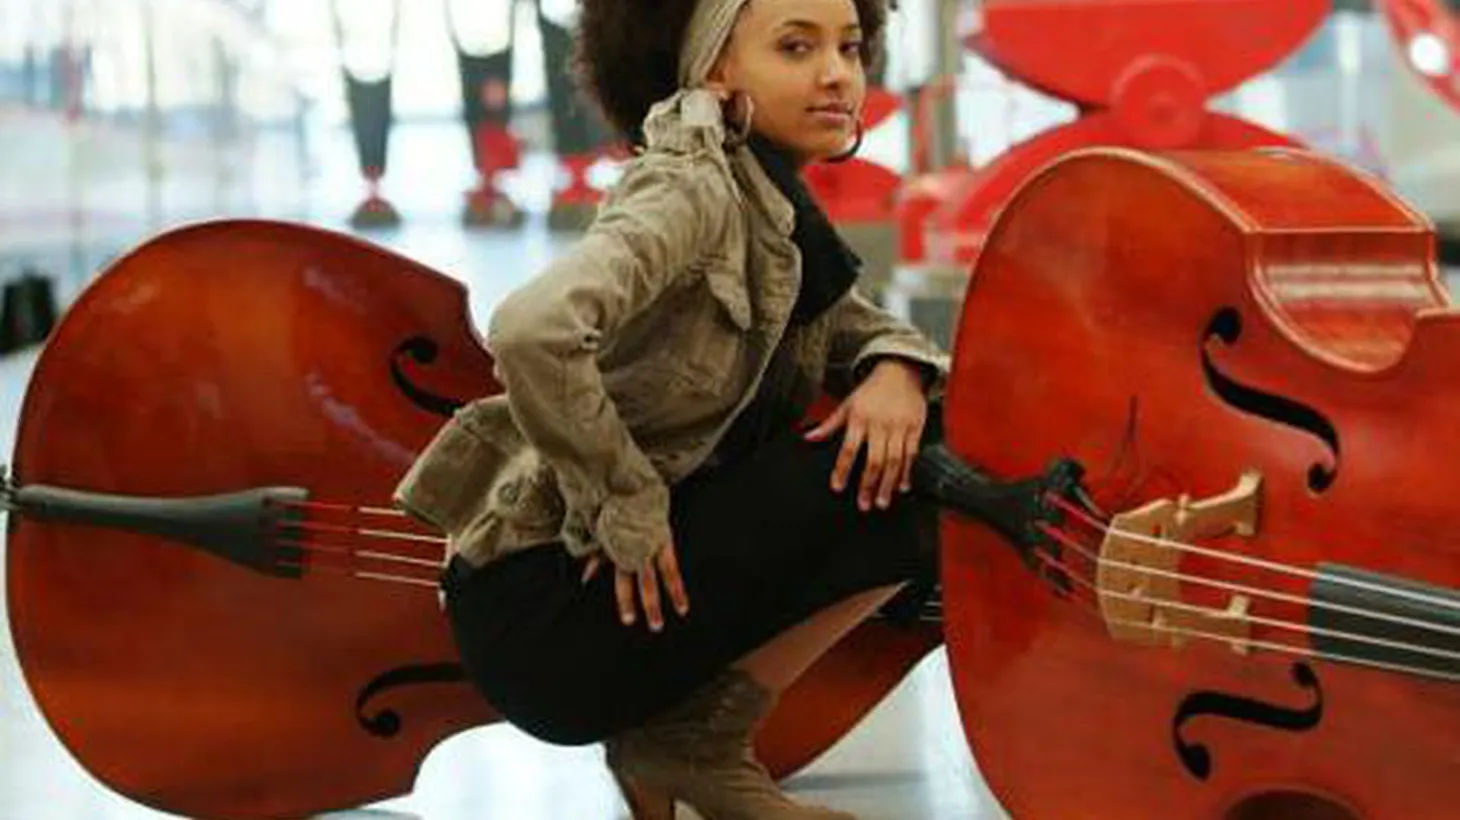 Grammy Award-winning bassist and composer Esperanza Spalding leads her large band through whimsically poetic songs and sprawling jams...